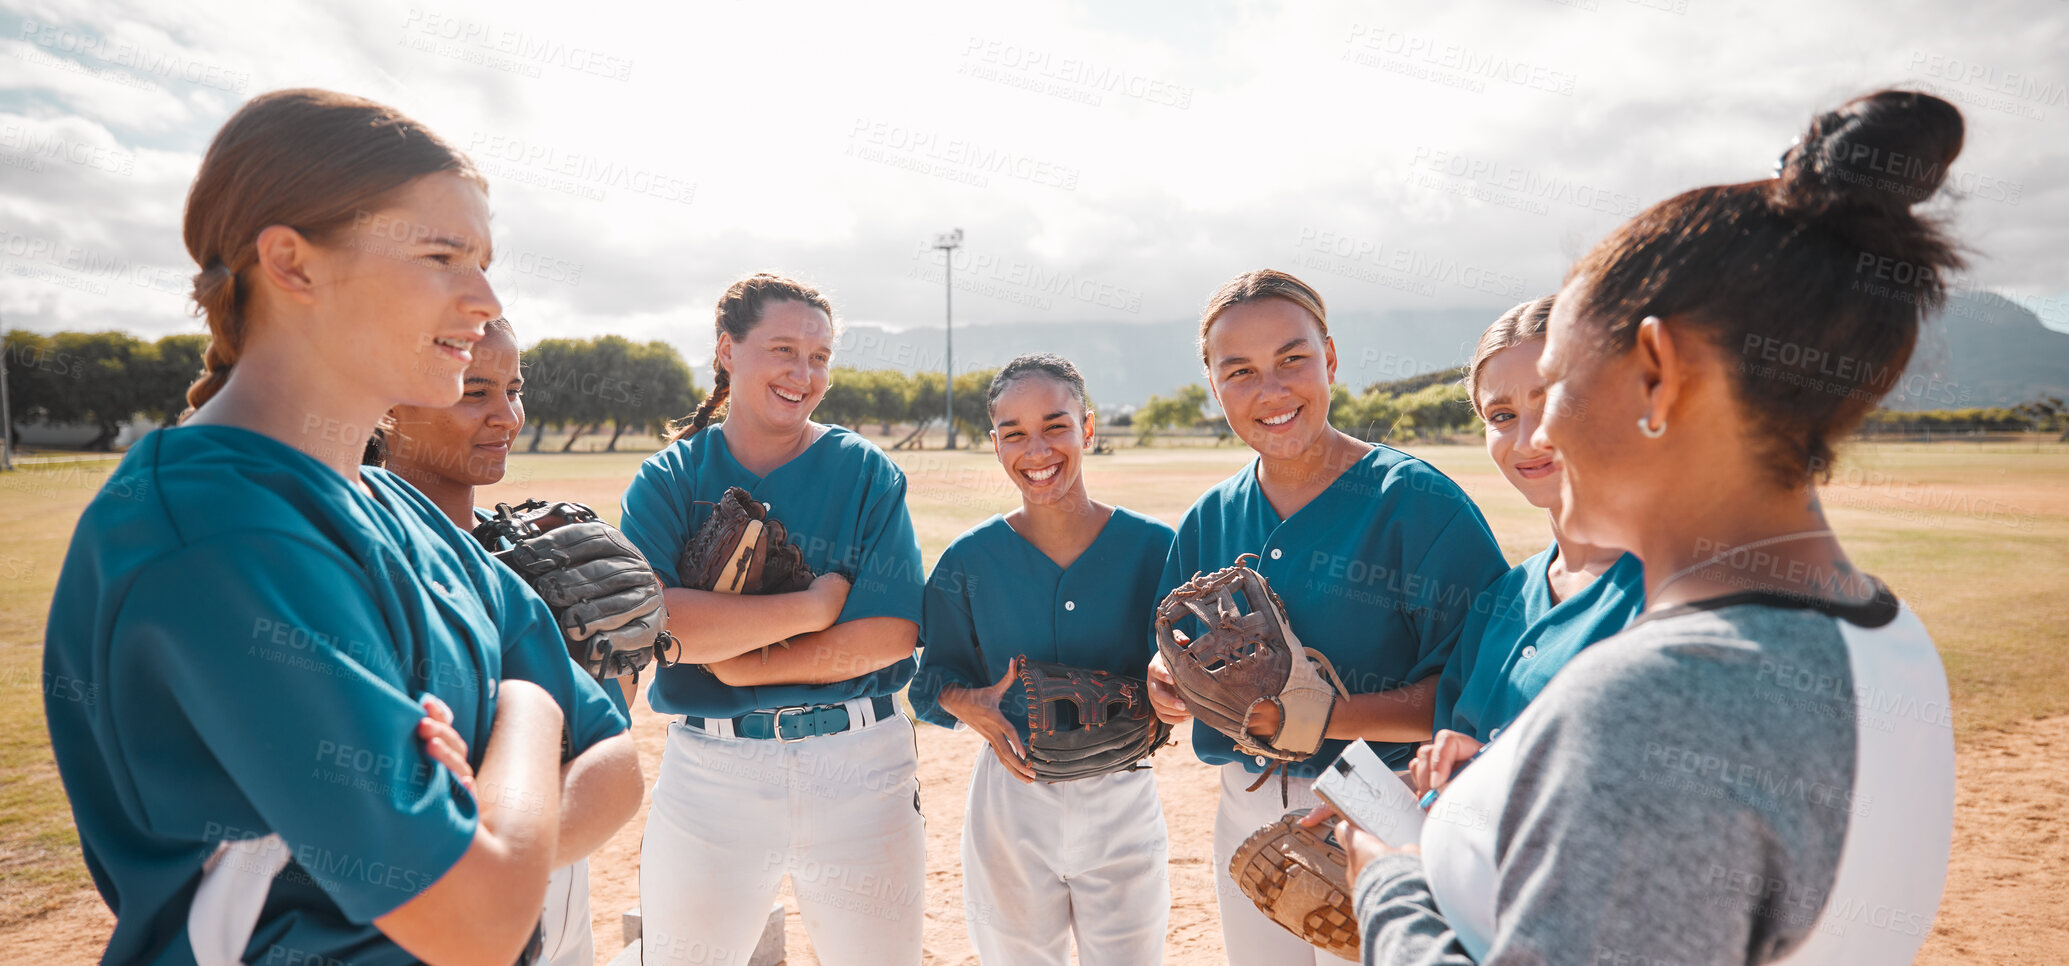 Buy stock photo Baseball, team and women with coach talking, conversation or speaking about game strategy. Motivation, teamwork and collaboration with leader coaching girls in softball sports training exercise.